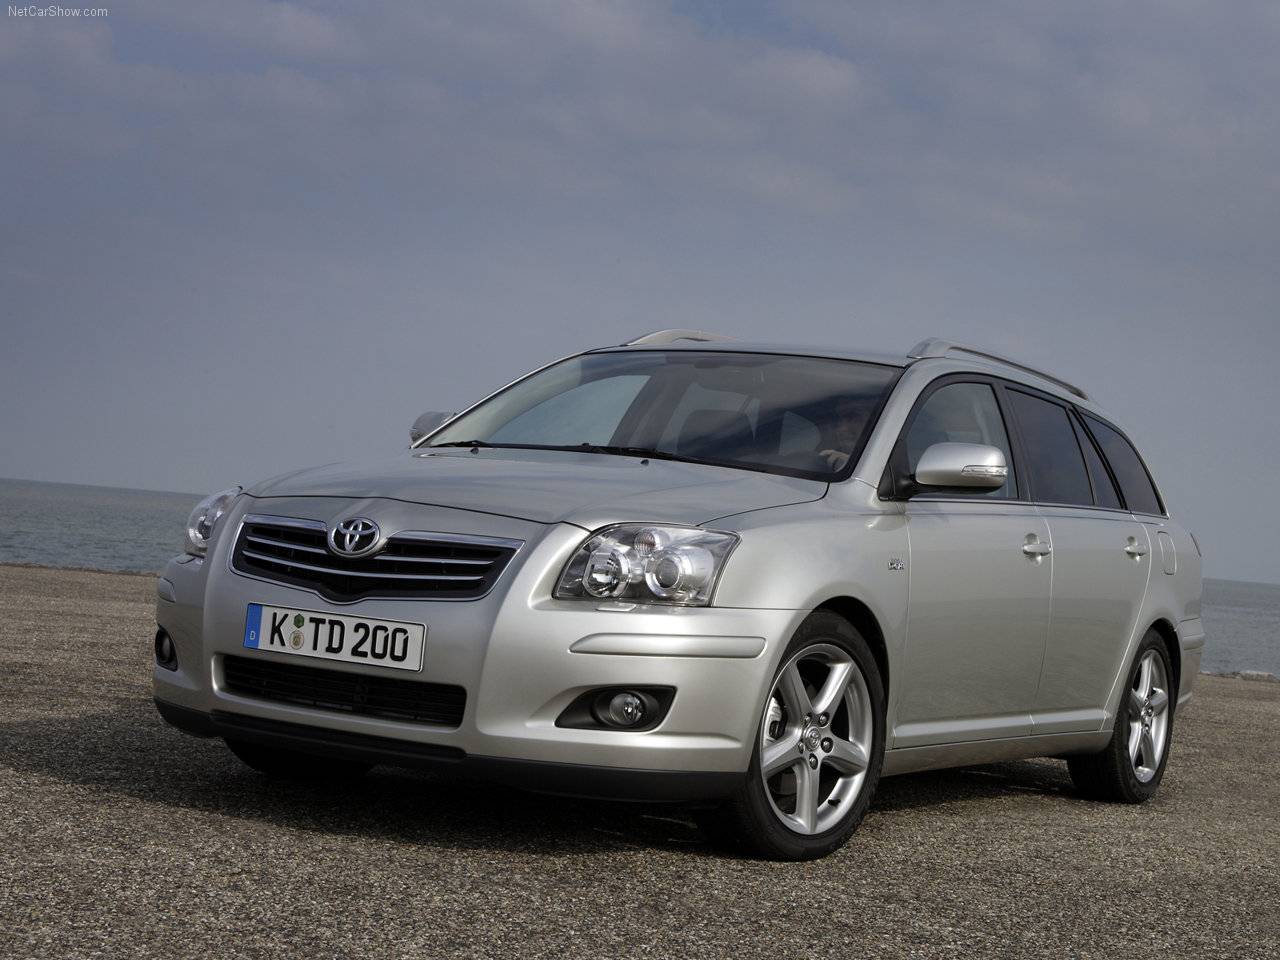 Toyota Avensis Wagon 2010 Review, Amazing Pictures and